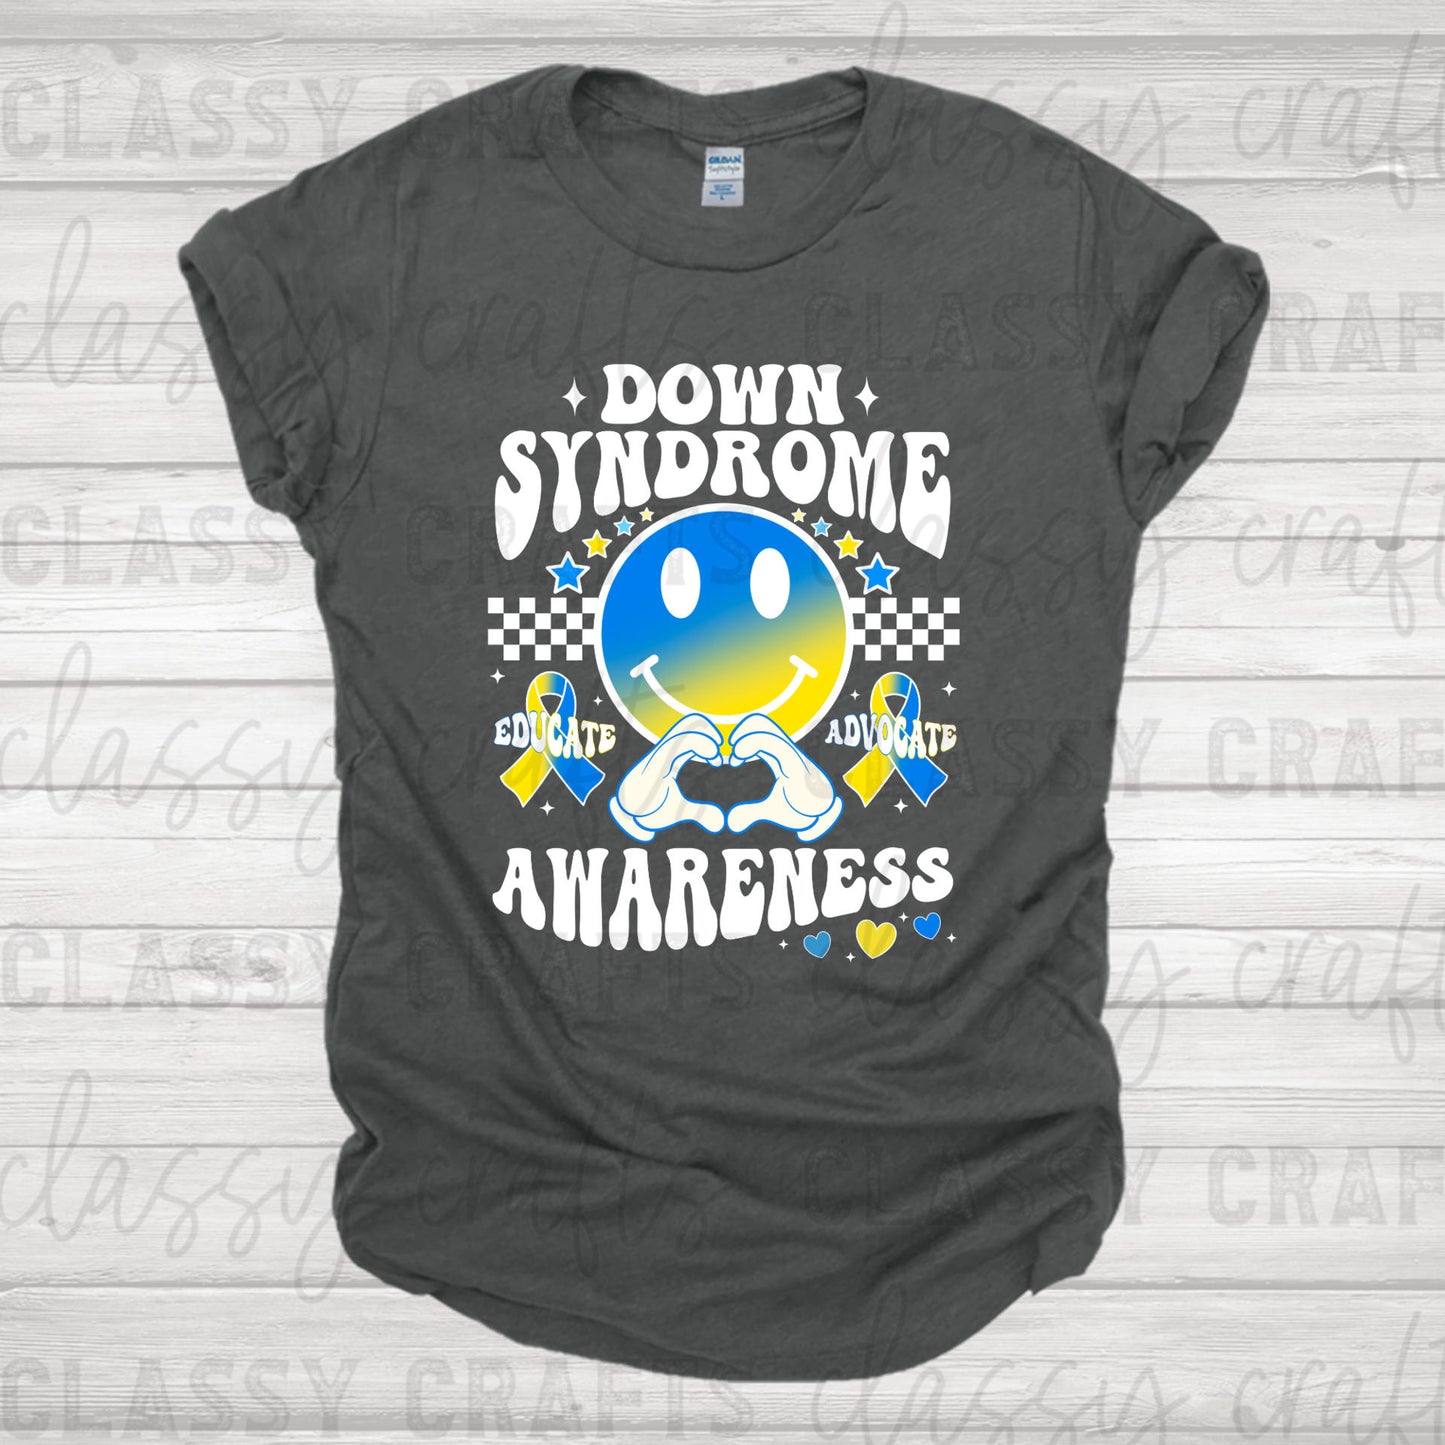 Down Syndrome Awareness White ** TWO PART* SOLD SEPARATELY** Transfer